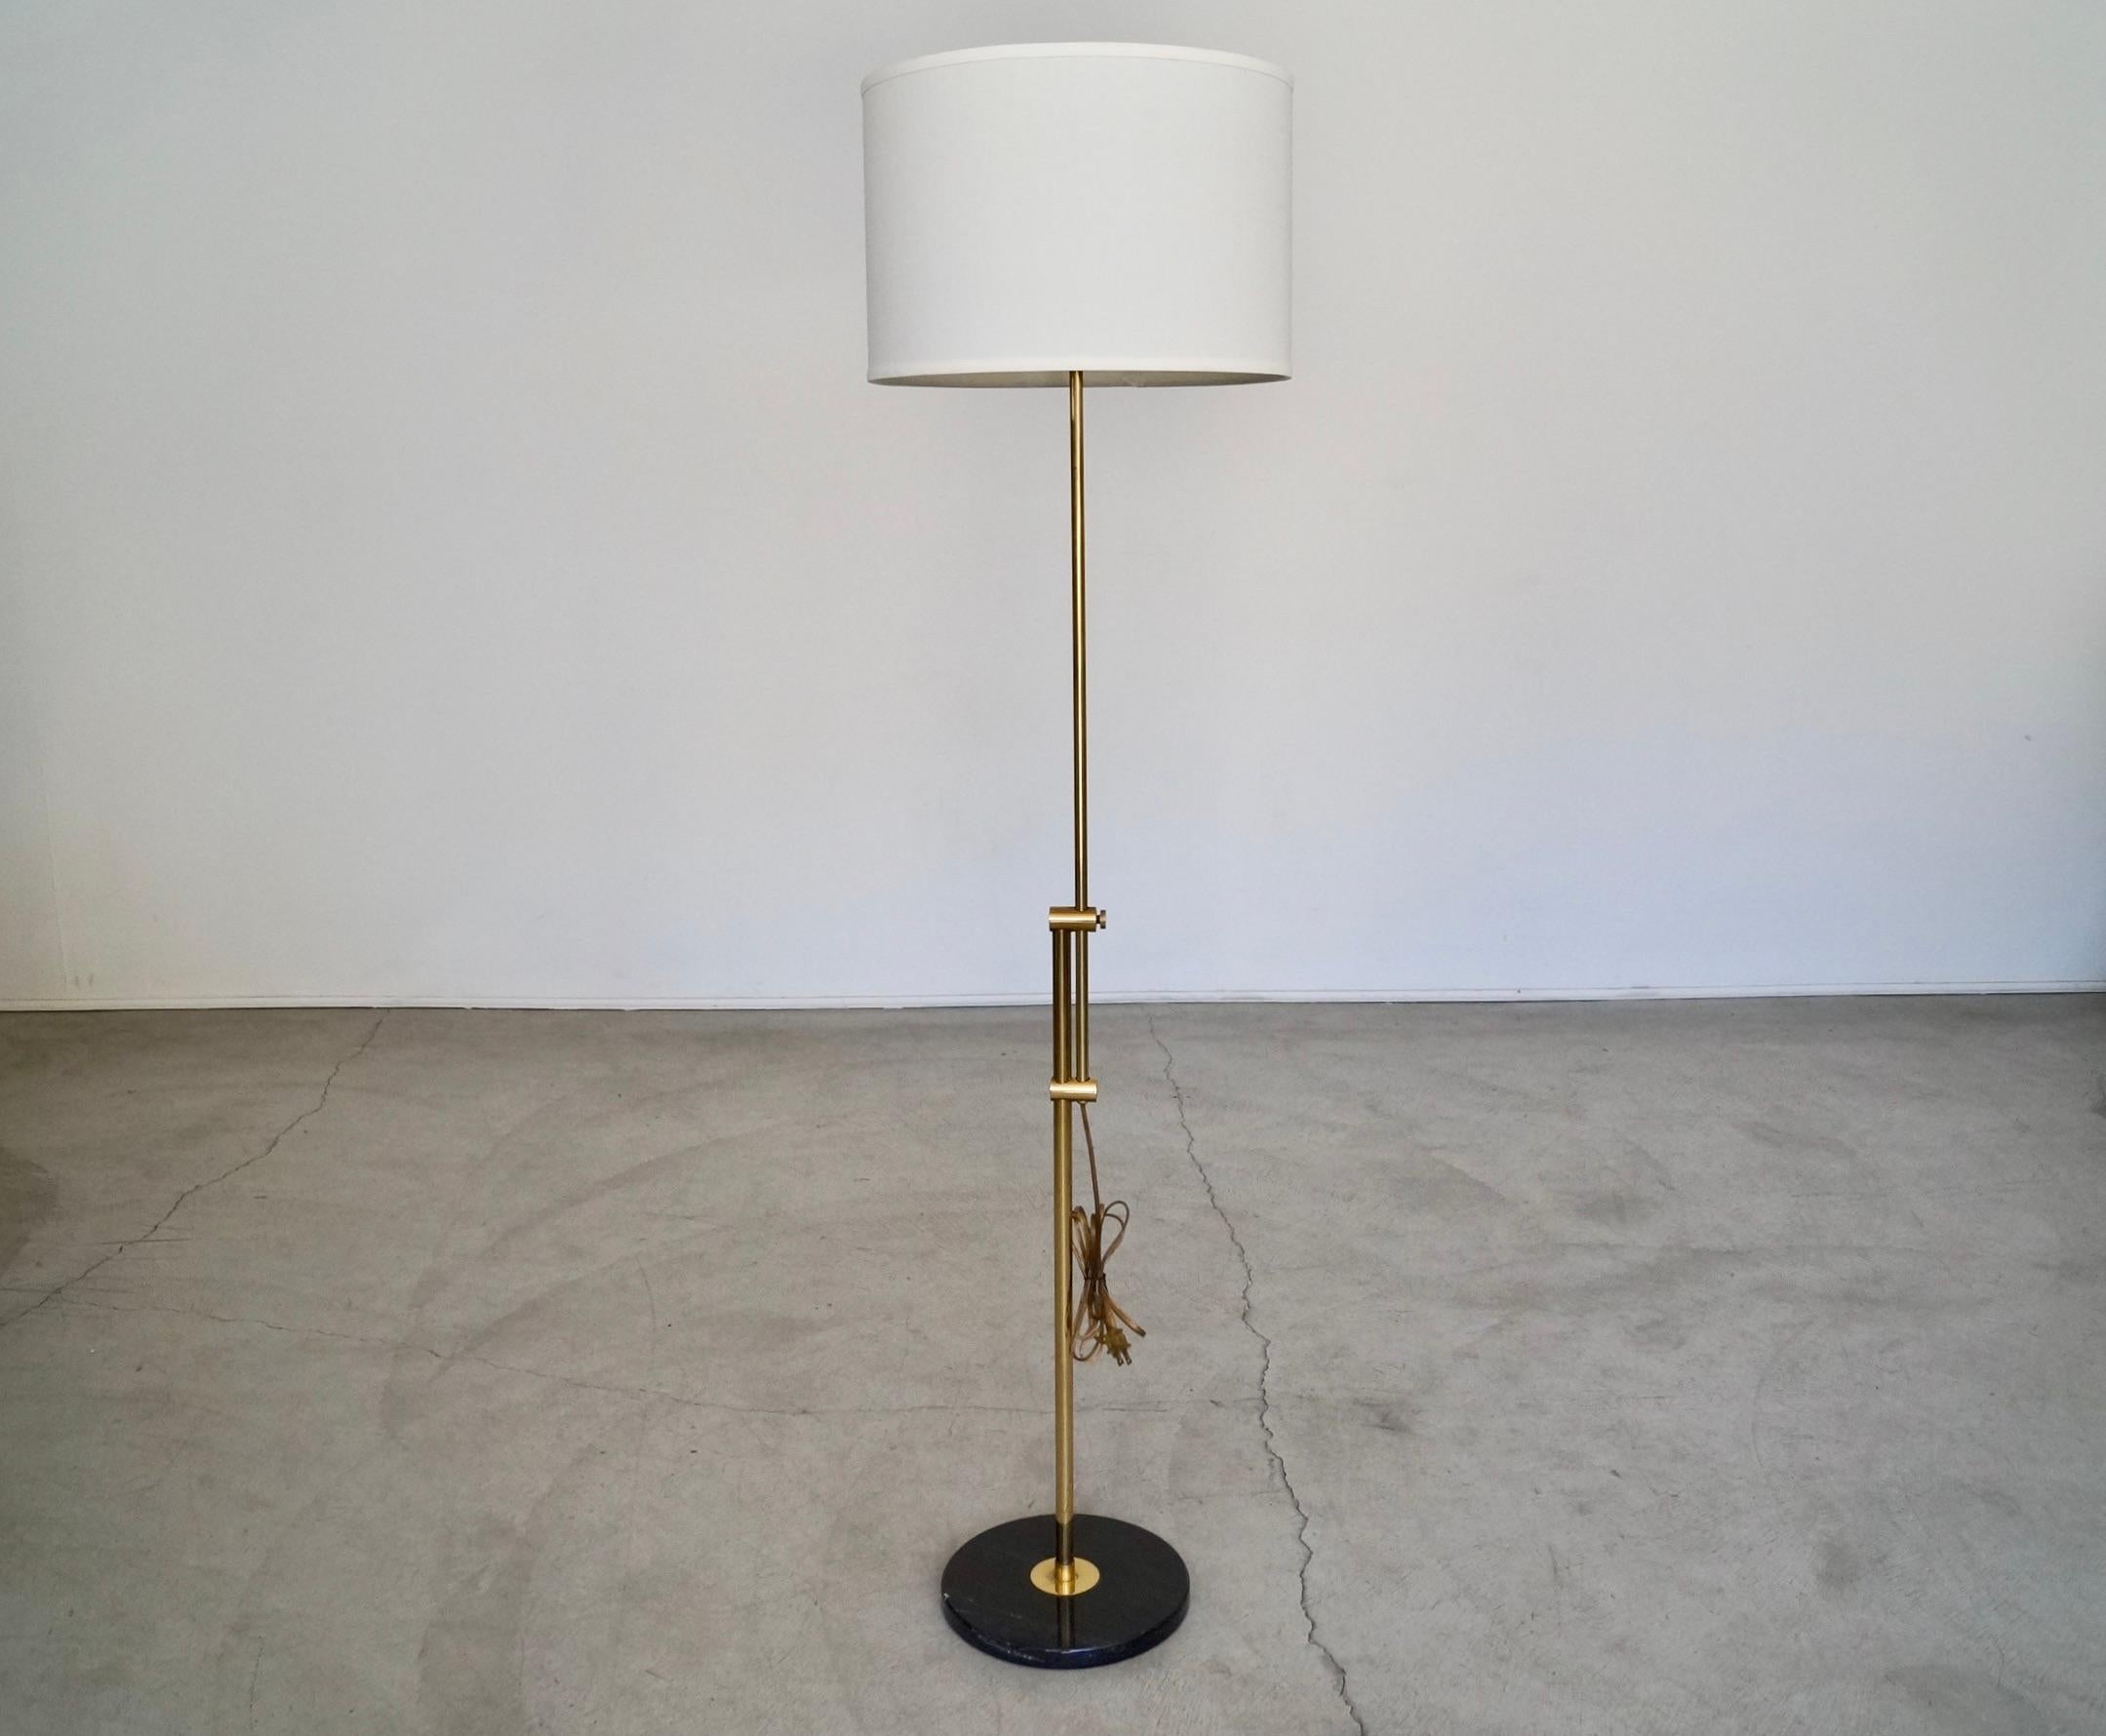 1960's Mid-Century Modern Brass & Marble Adjustable Floor Lamp In Good Condition For Sale In Burbank, CA